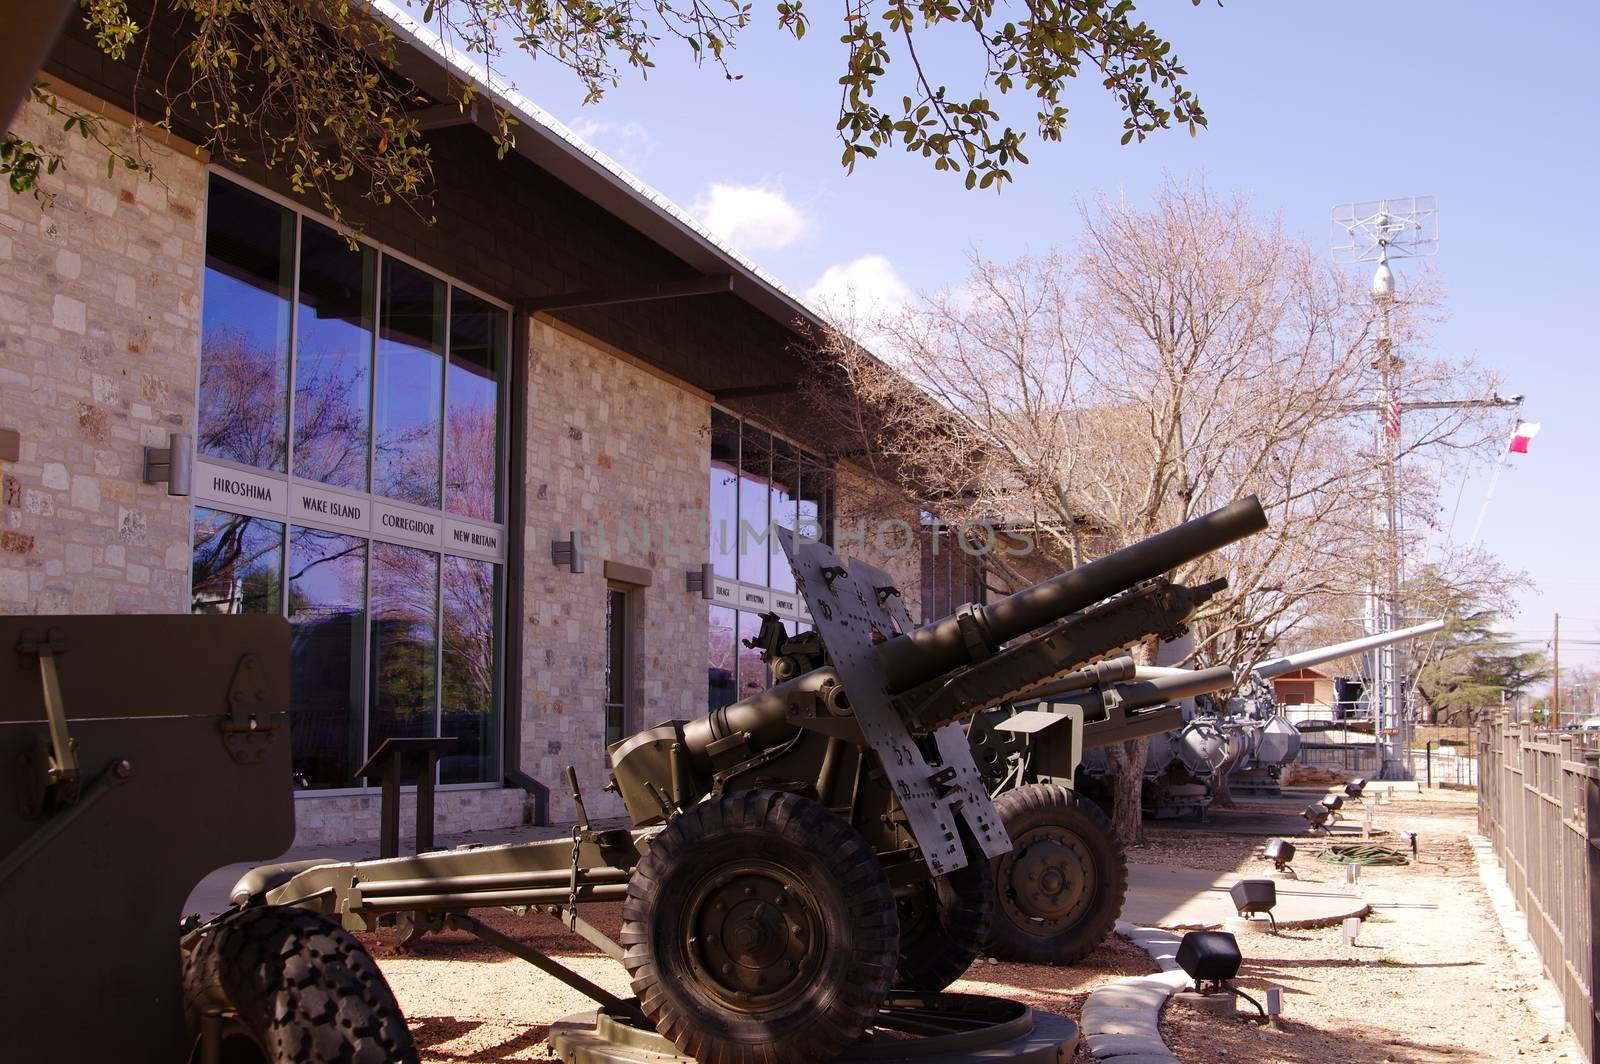 FREDERICKSBURG, TEXAS/UNITED STATES - FEBRUARY 21: World War II artillery weapons line the front of the National Museum of the Pacific War in  Fredericksburg, Texas on February 21, 2015.